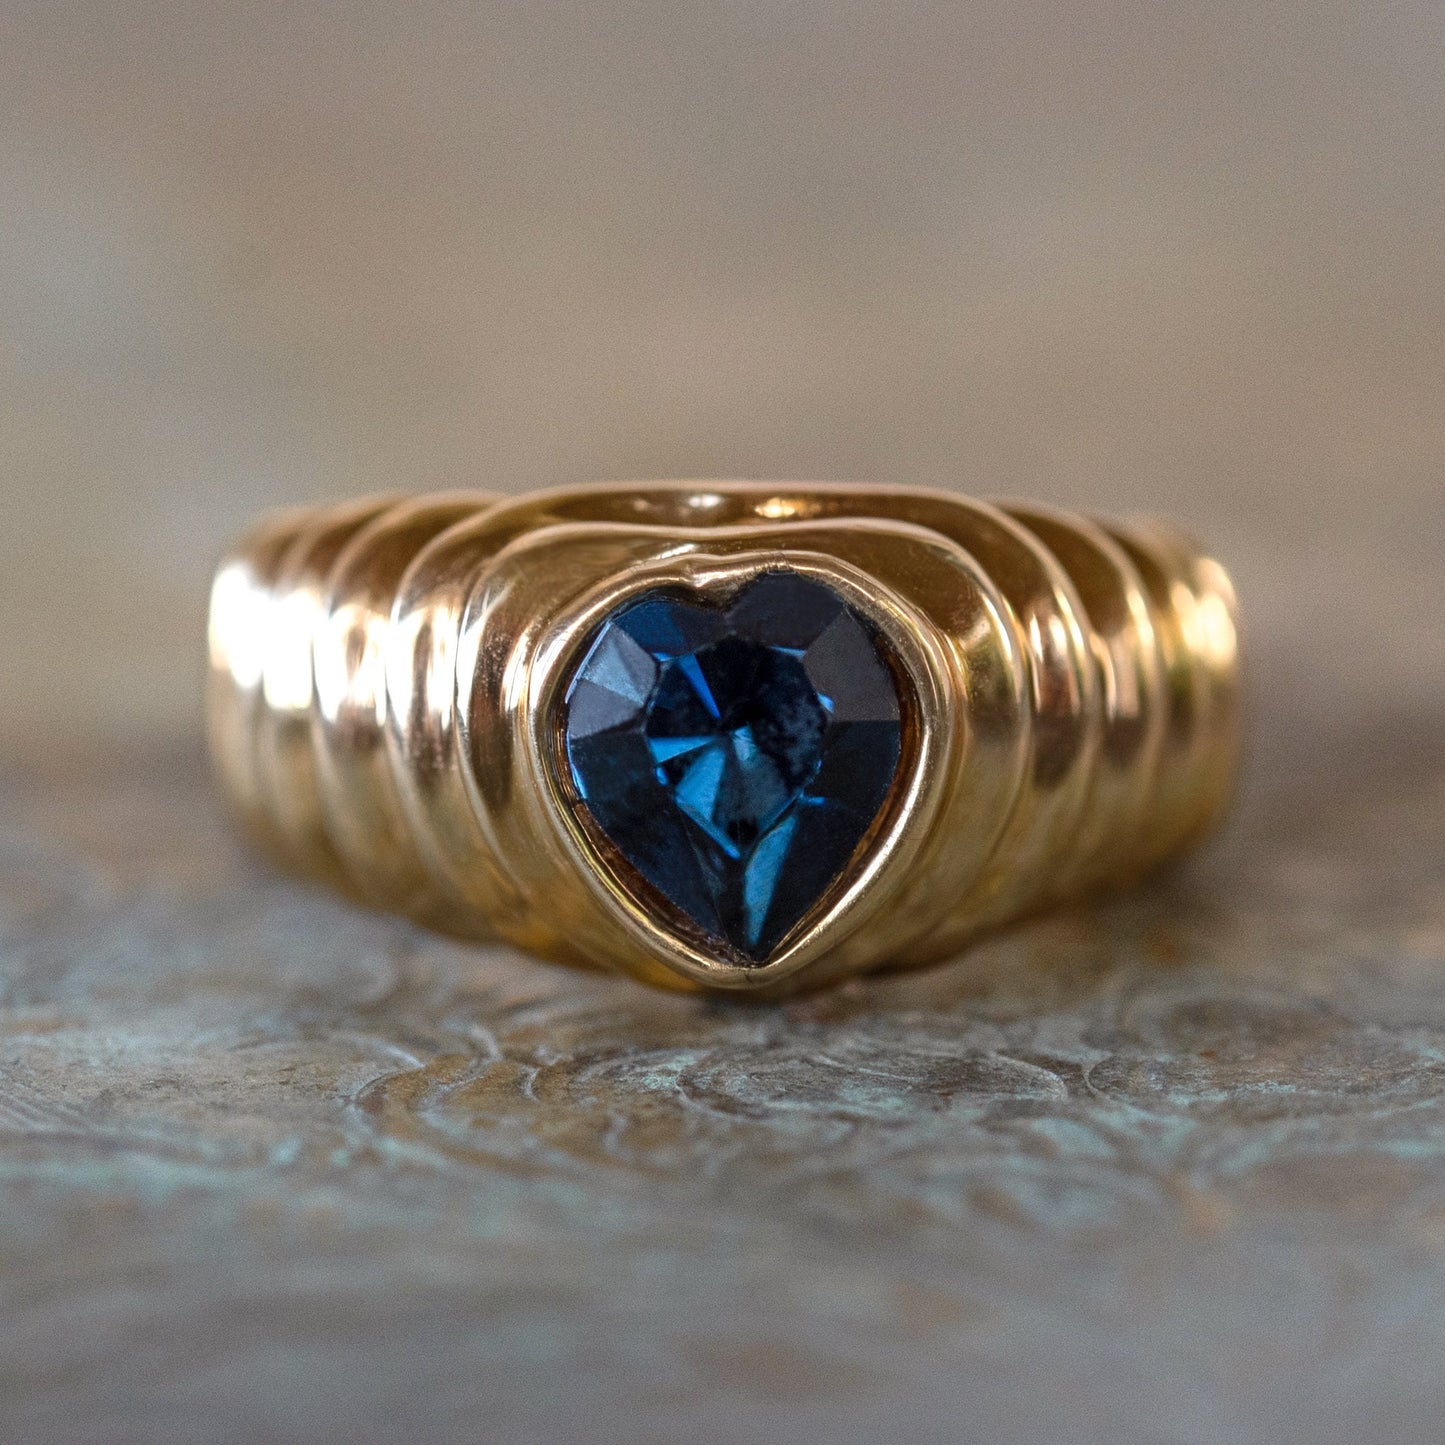 Vintage Ring Sapphire Swarovski Crystal Heart Ring 18k Gold Womans Handmade Antique Jewelry Hearts R2063 - Limited Stock - Never Worn